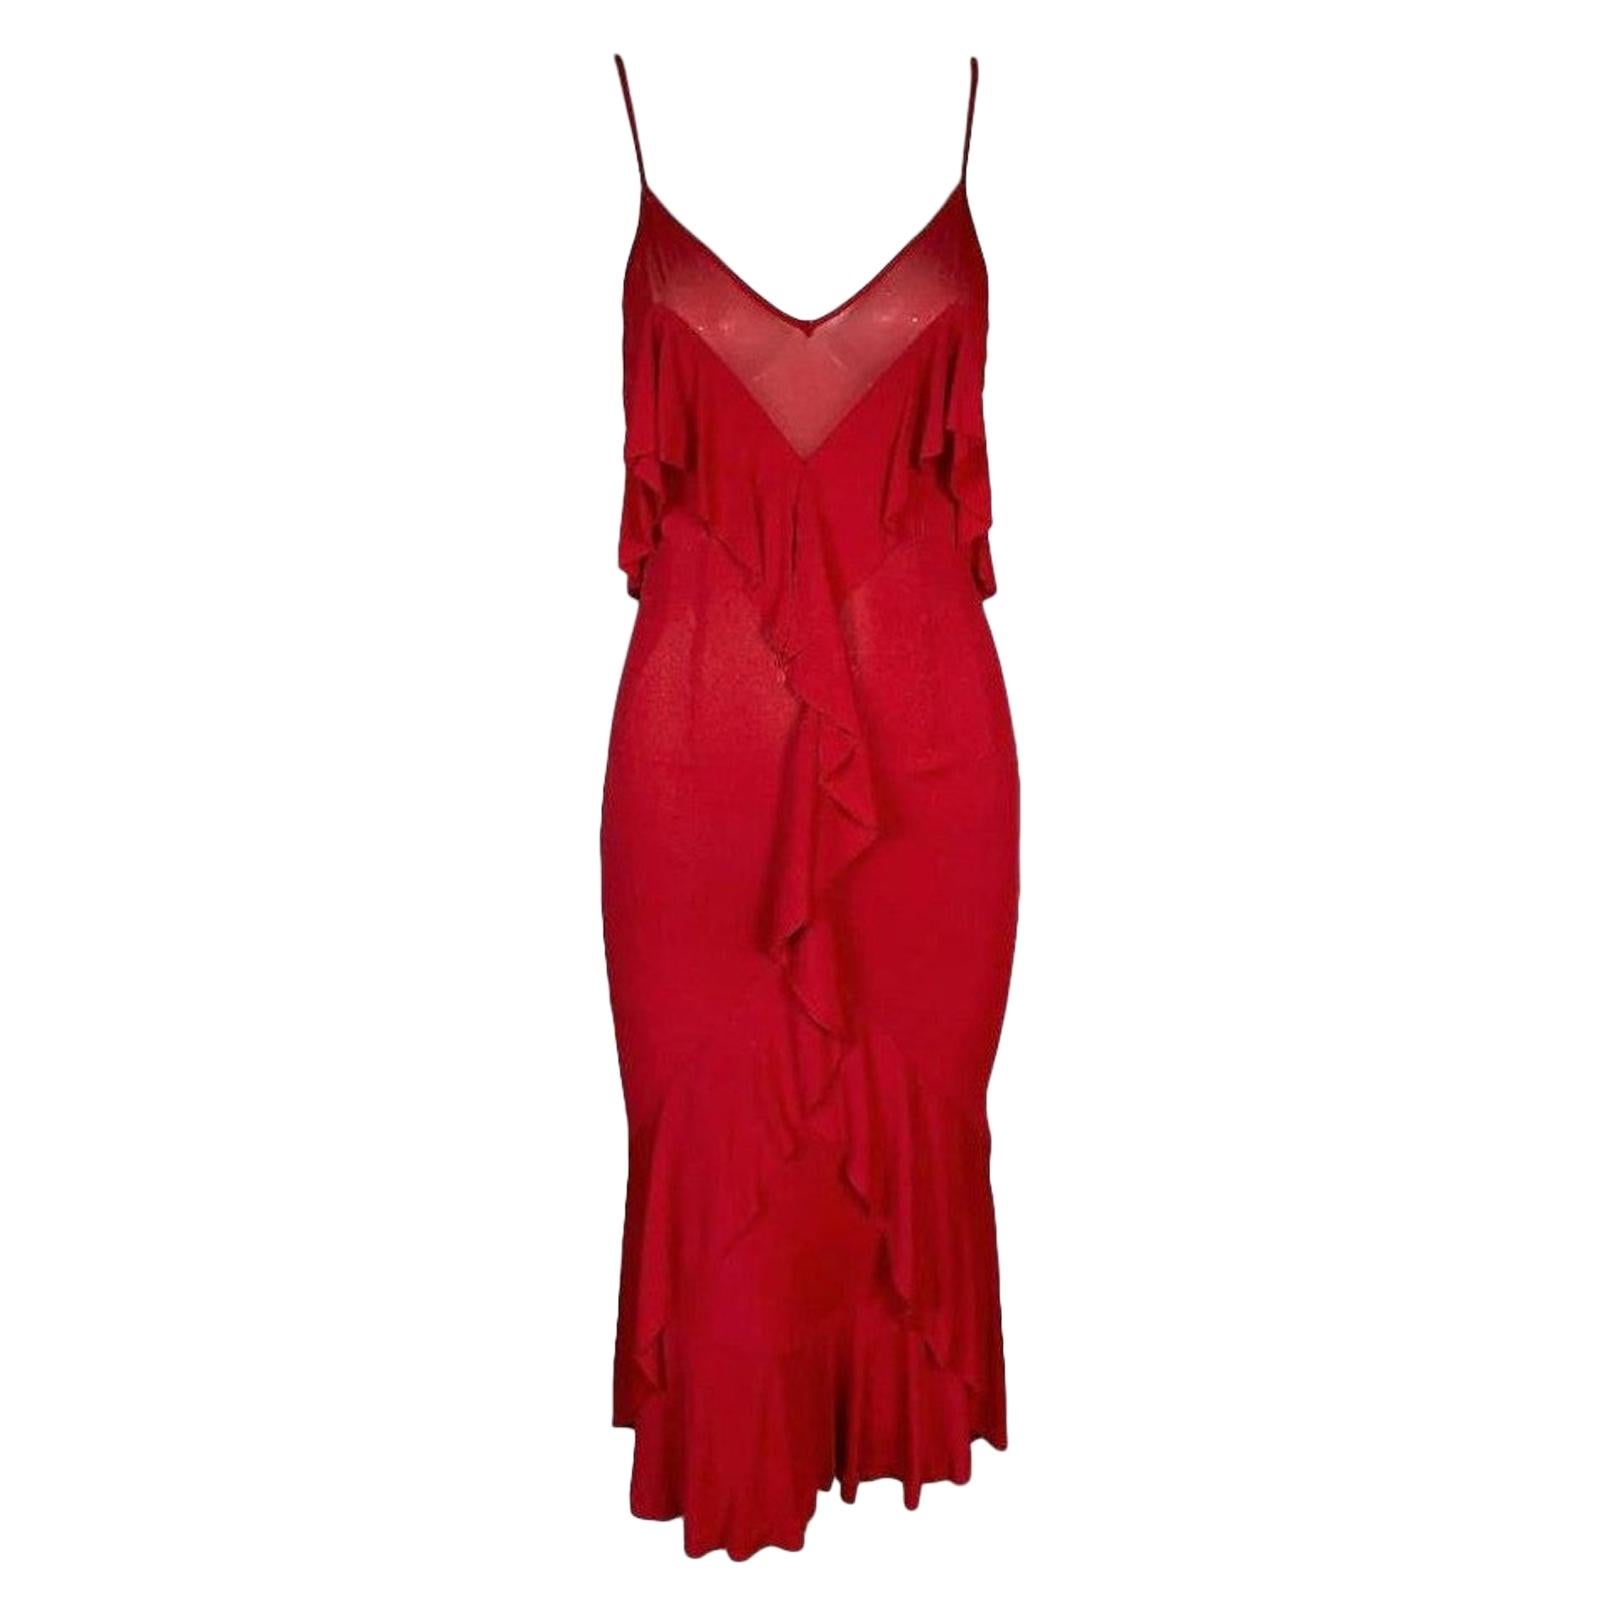 F/W 2003 Yves Saint Laurent Tom Ford Sheer Red Plunging Ruffle Dress L ...